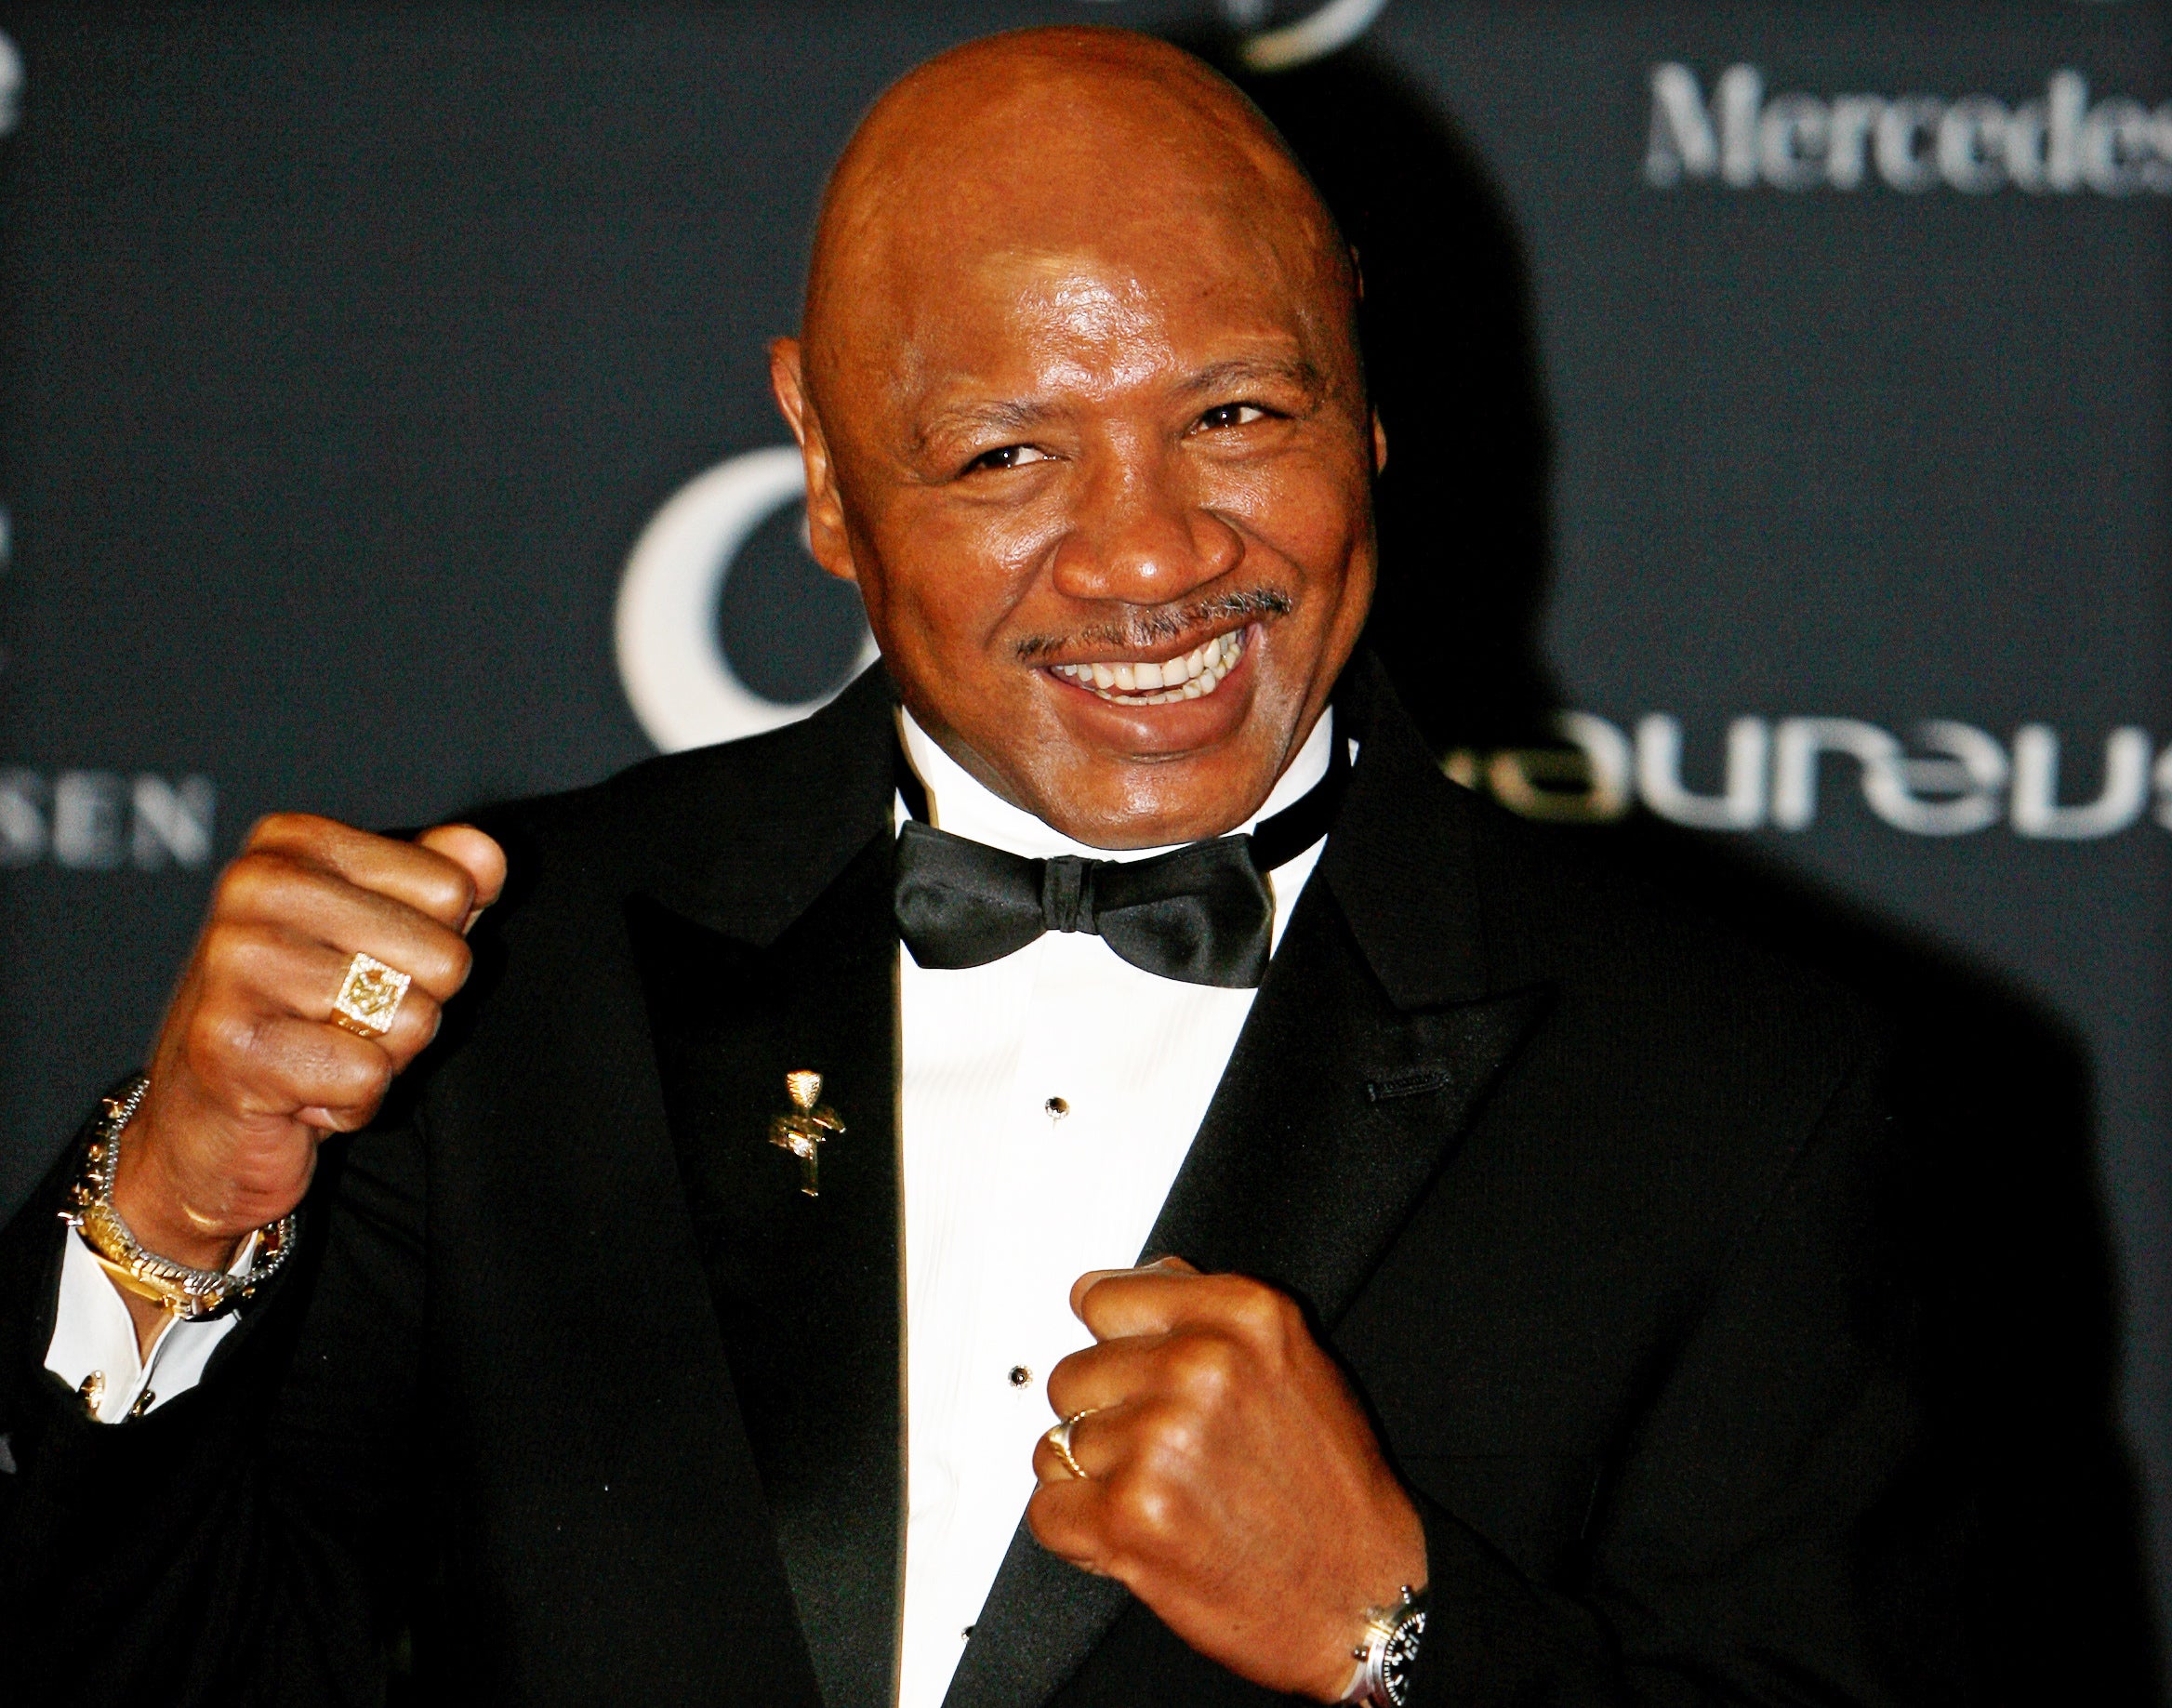 Marvin Hagler Boxing champion and one of the greatest-ever middleweights The Independent